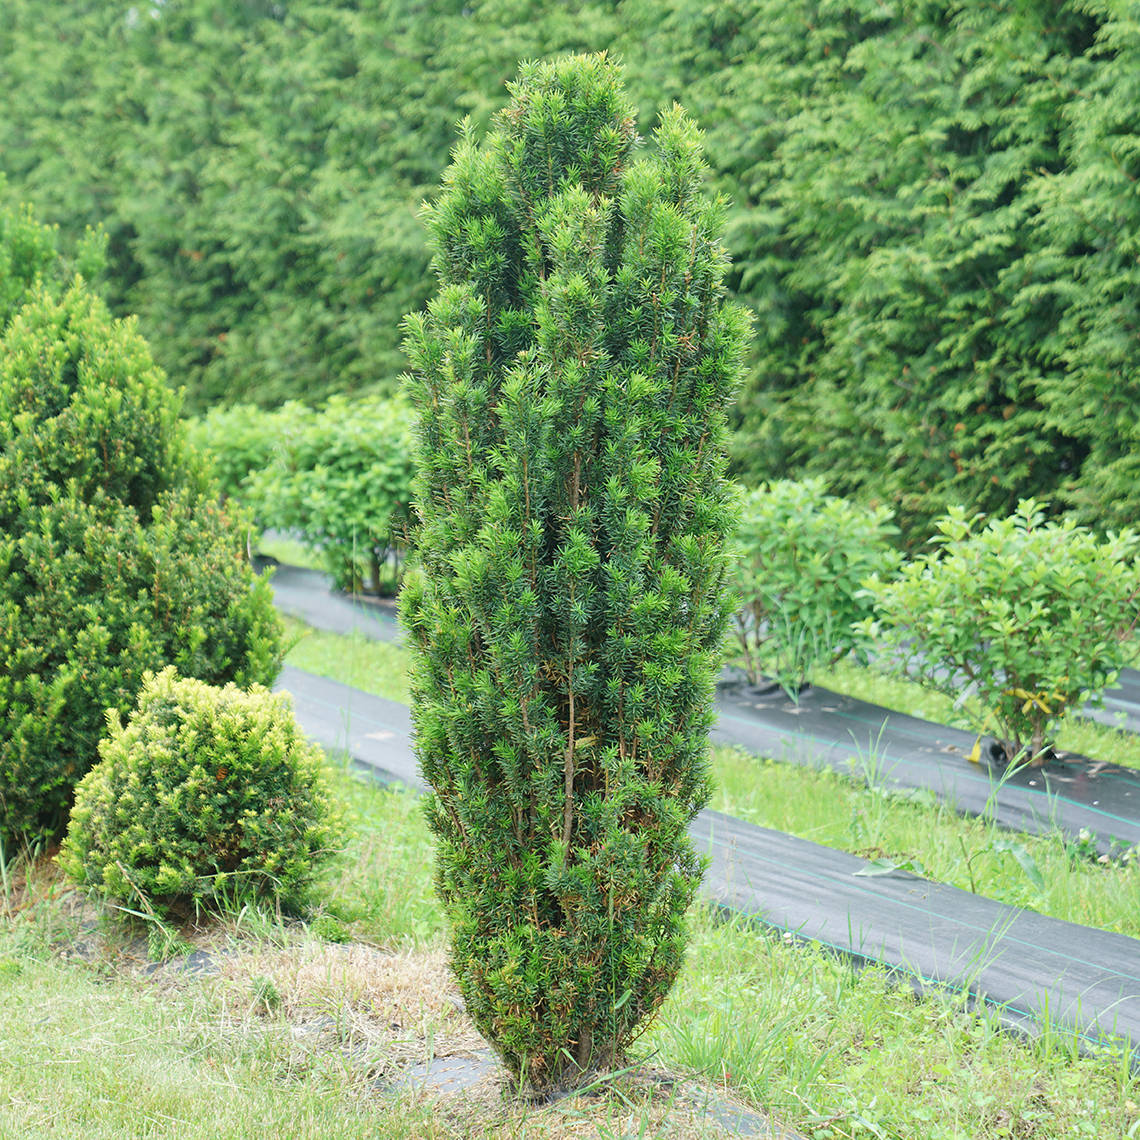 Stonehenge Skinny yew grows in an outdoor trial field in Michigan